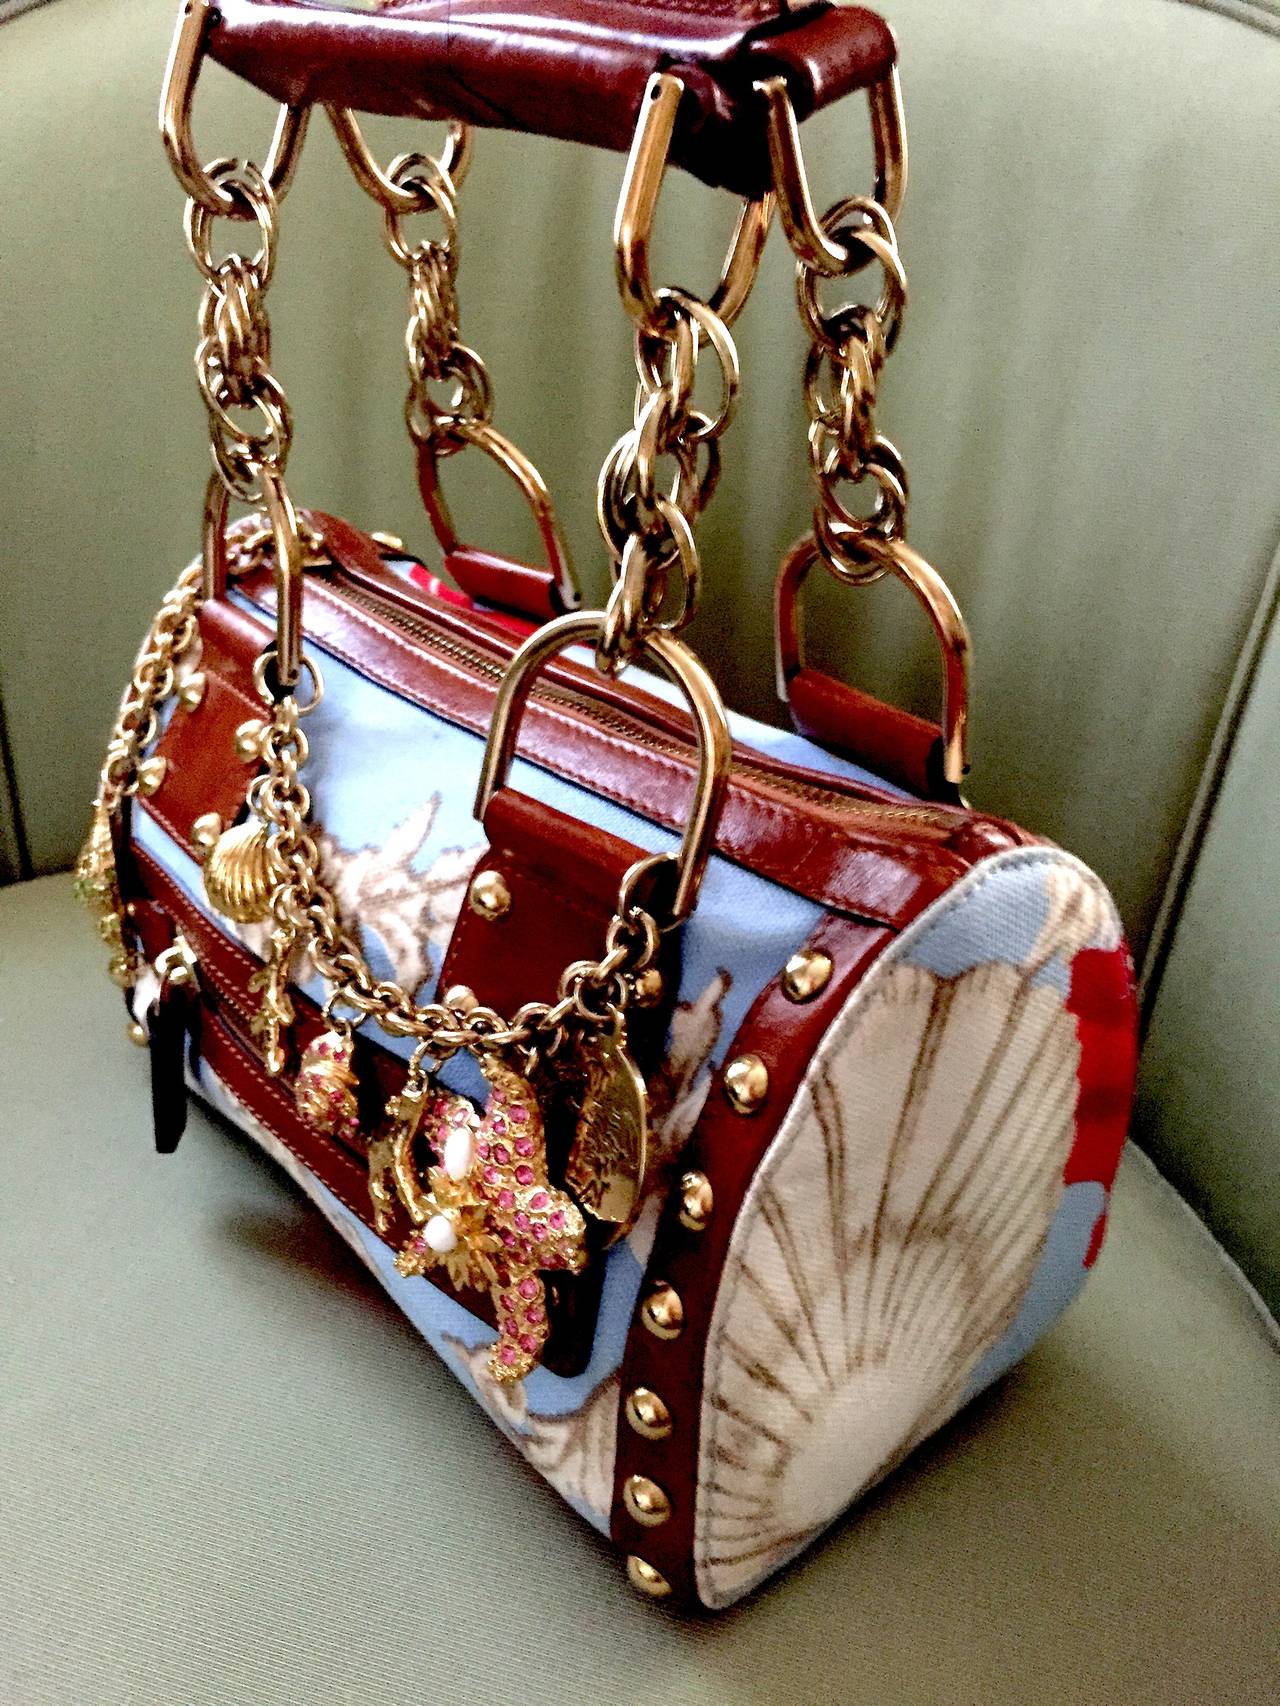 Wonderful vintage small handbag from Versace.
Spring 1992.
With a Baroque sea shell motif, trimmed in studded leather and festooned with dangling sea shell charms, this is a charming vintage Versace bag.

This is such a gorgeous bag, so great,